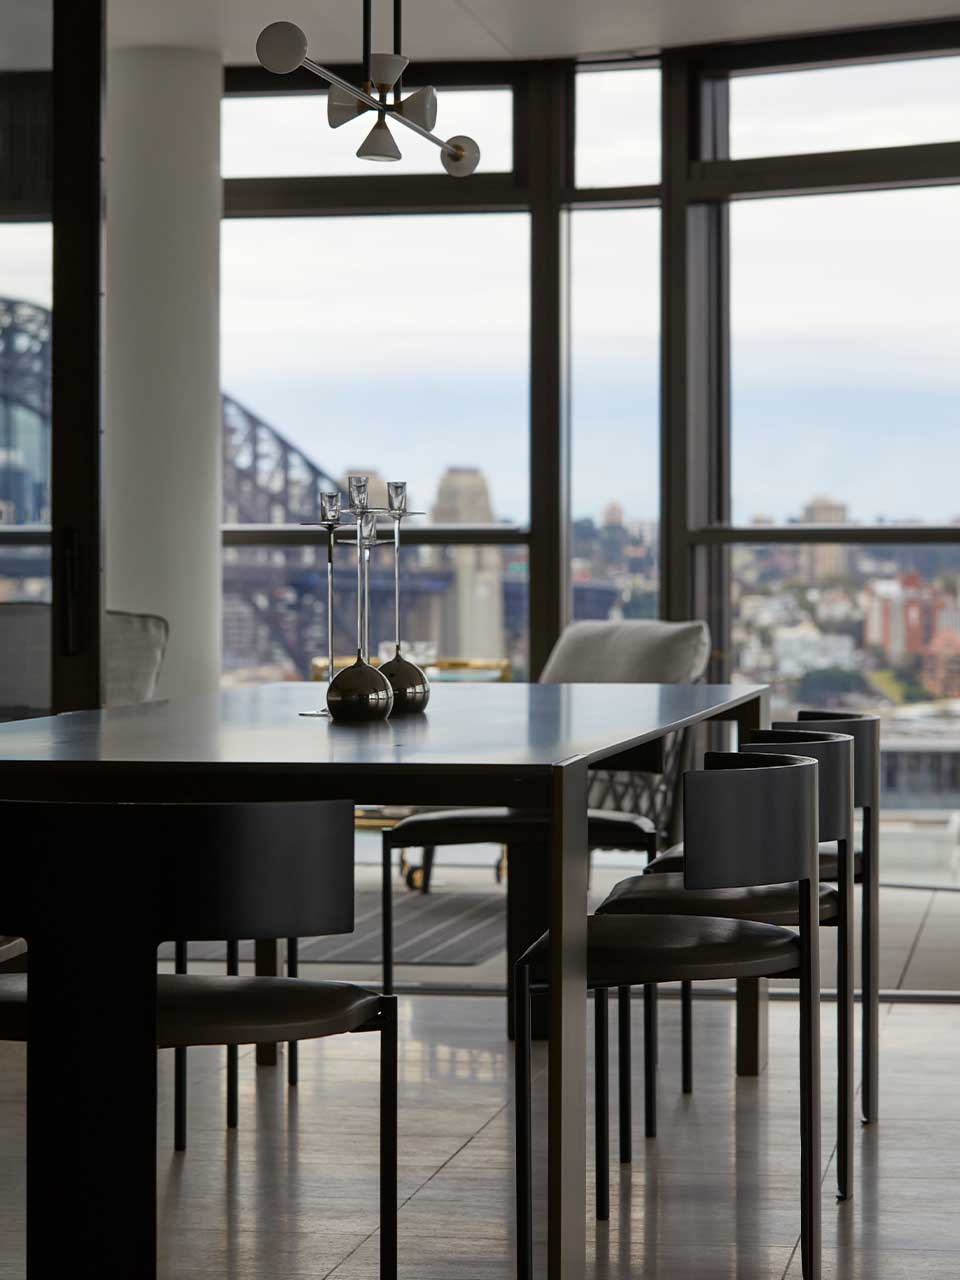 Overlooking the Sydney Opera House, we have the perfect Metallico dining table by Living Divani and Baxter Zefir chairs.